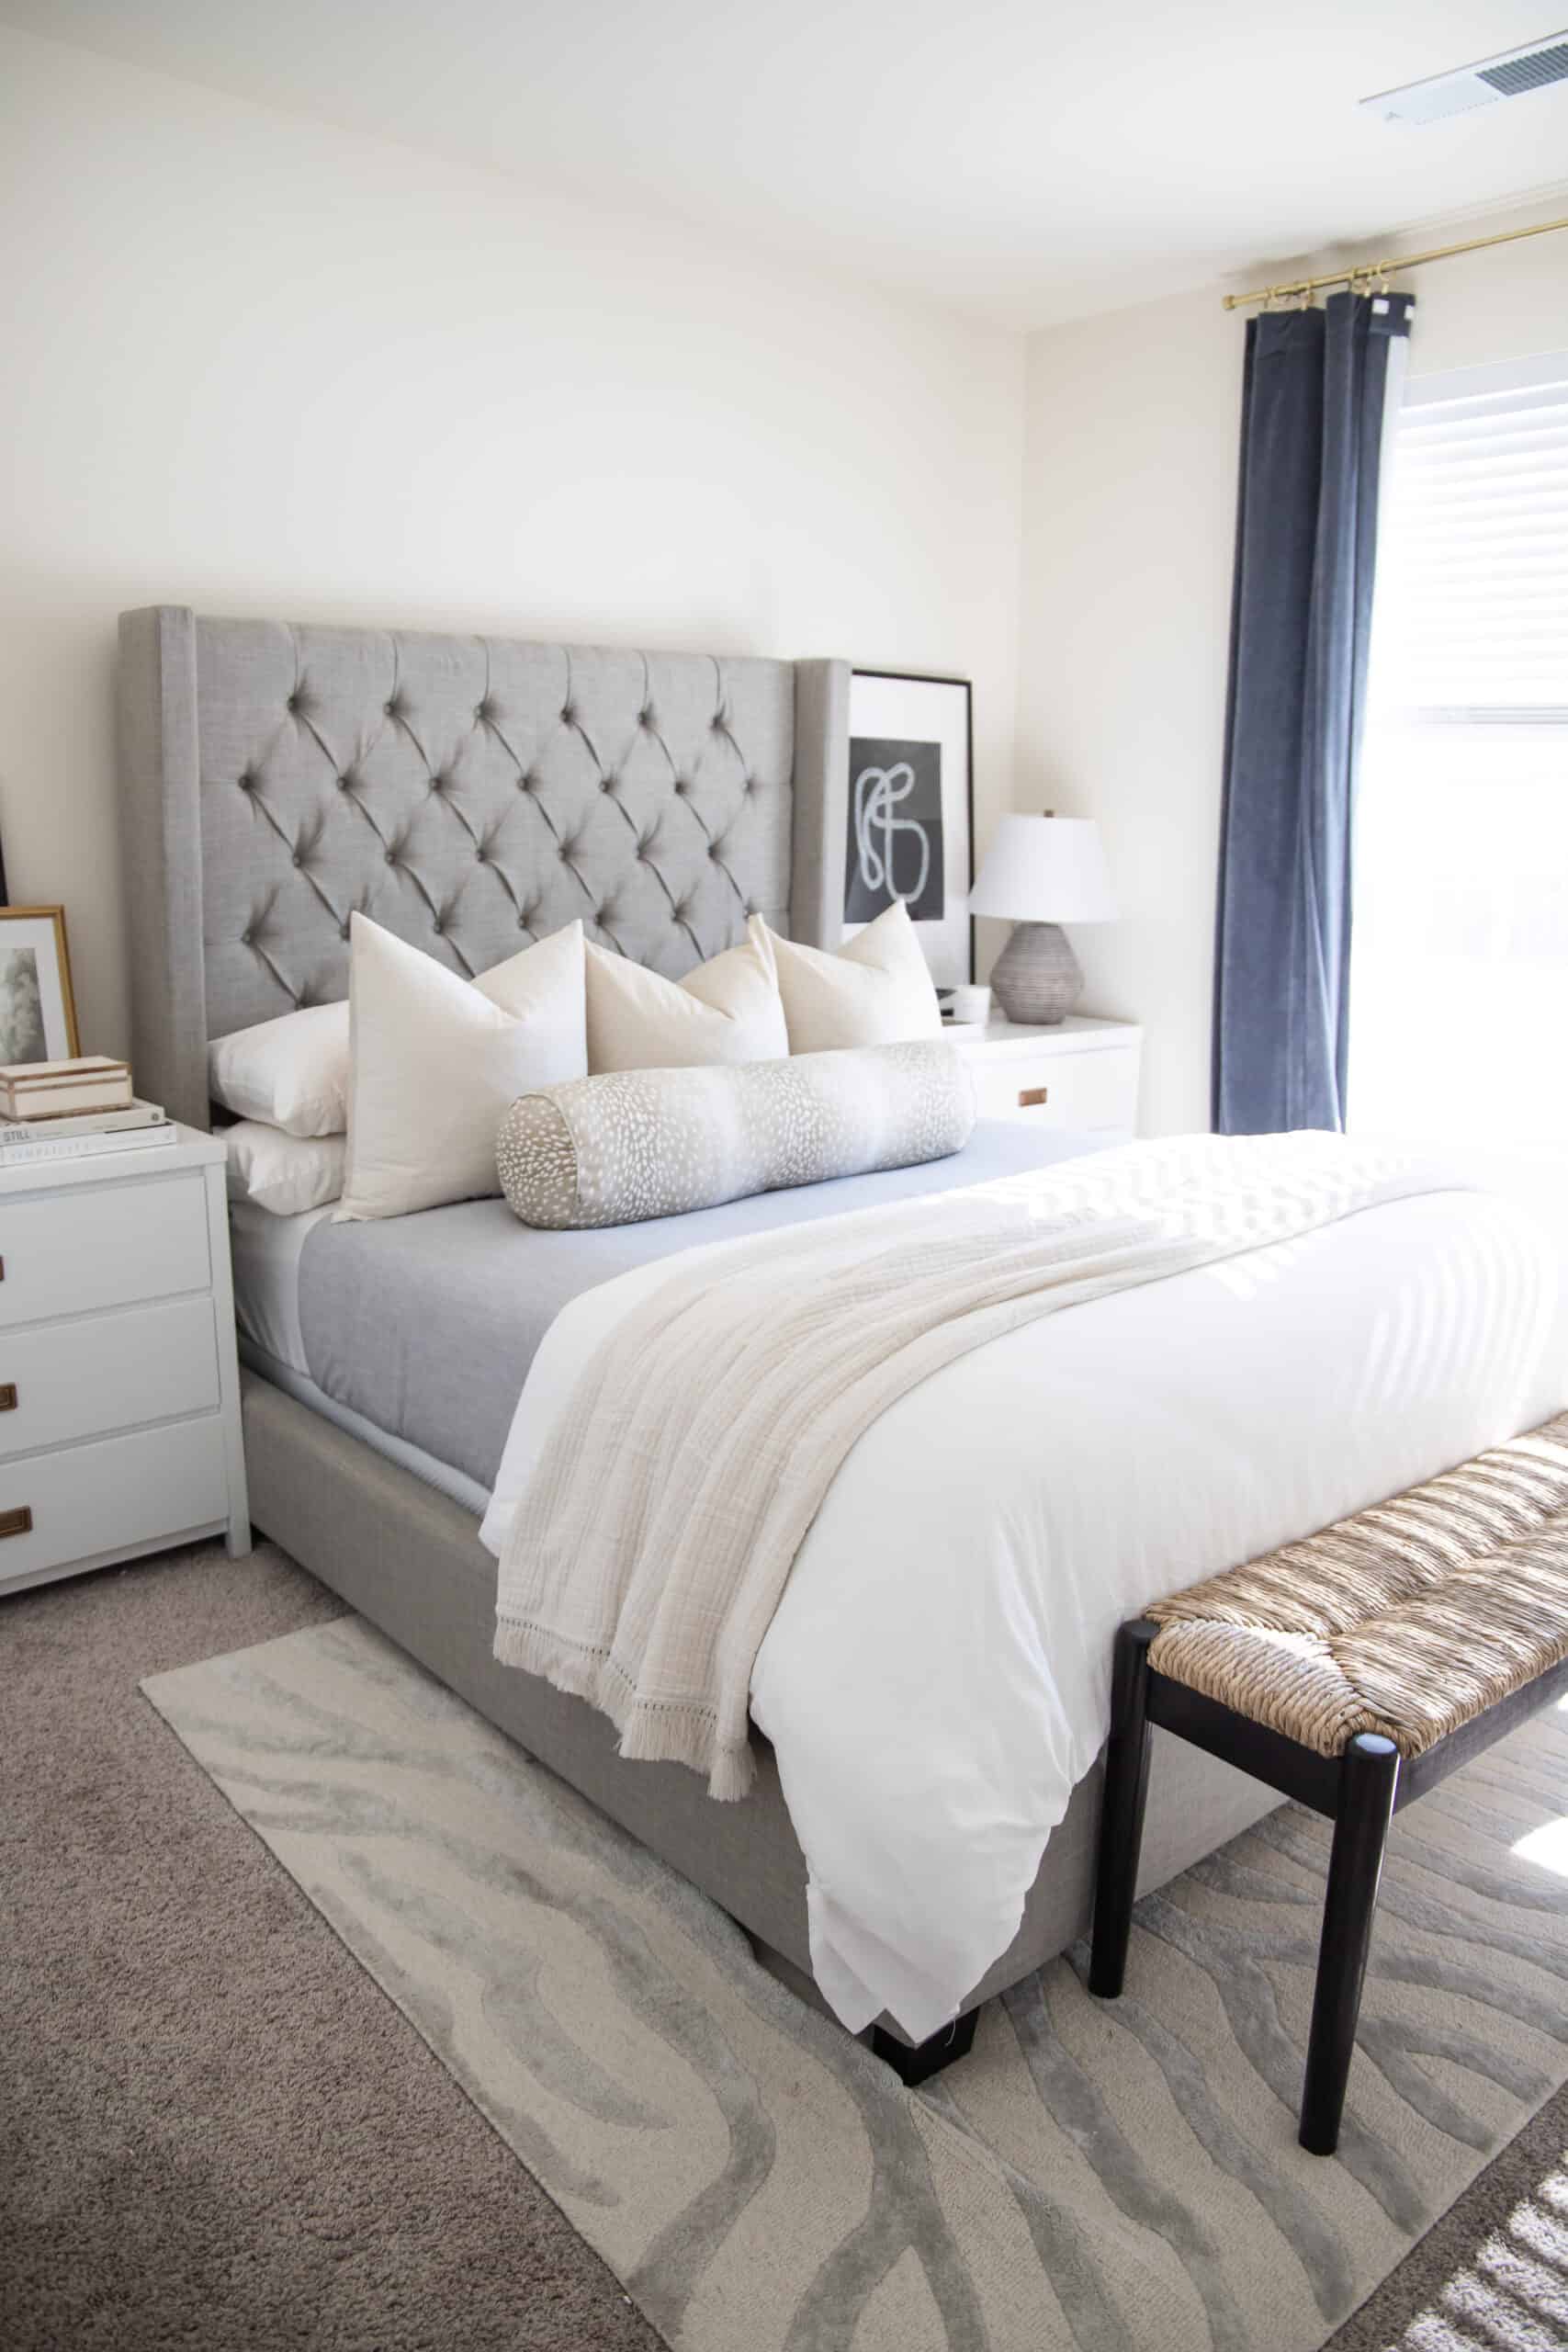 DIY Tips to Organize Your Bedroom on a Budget